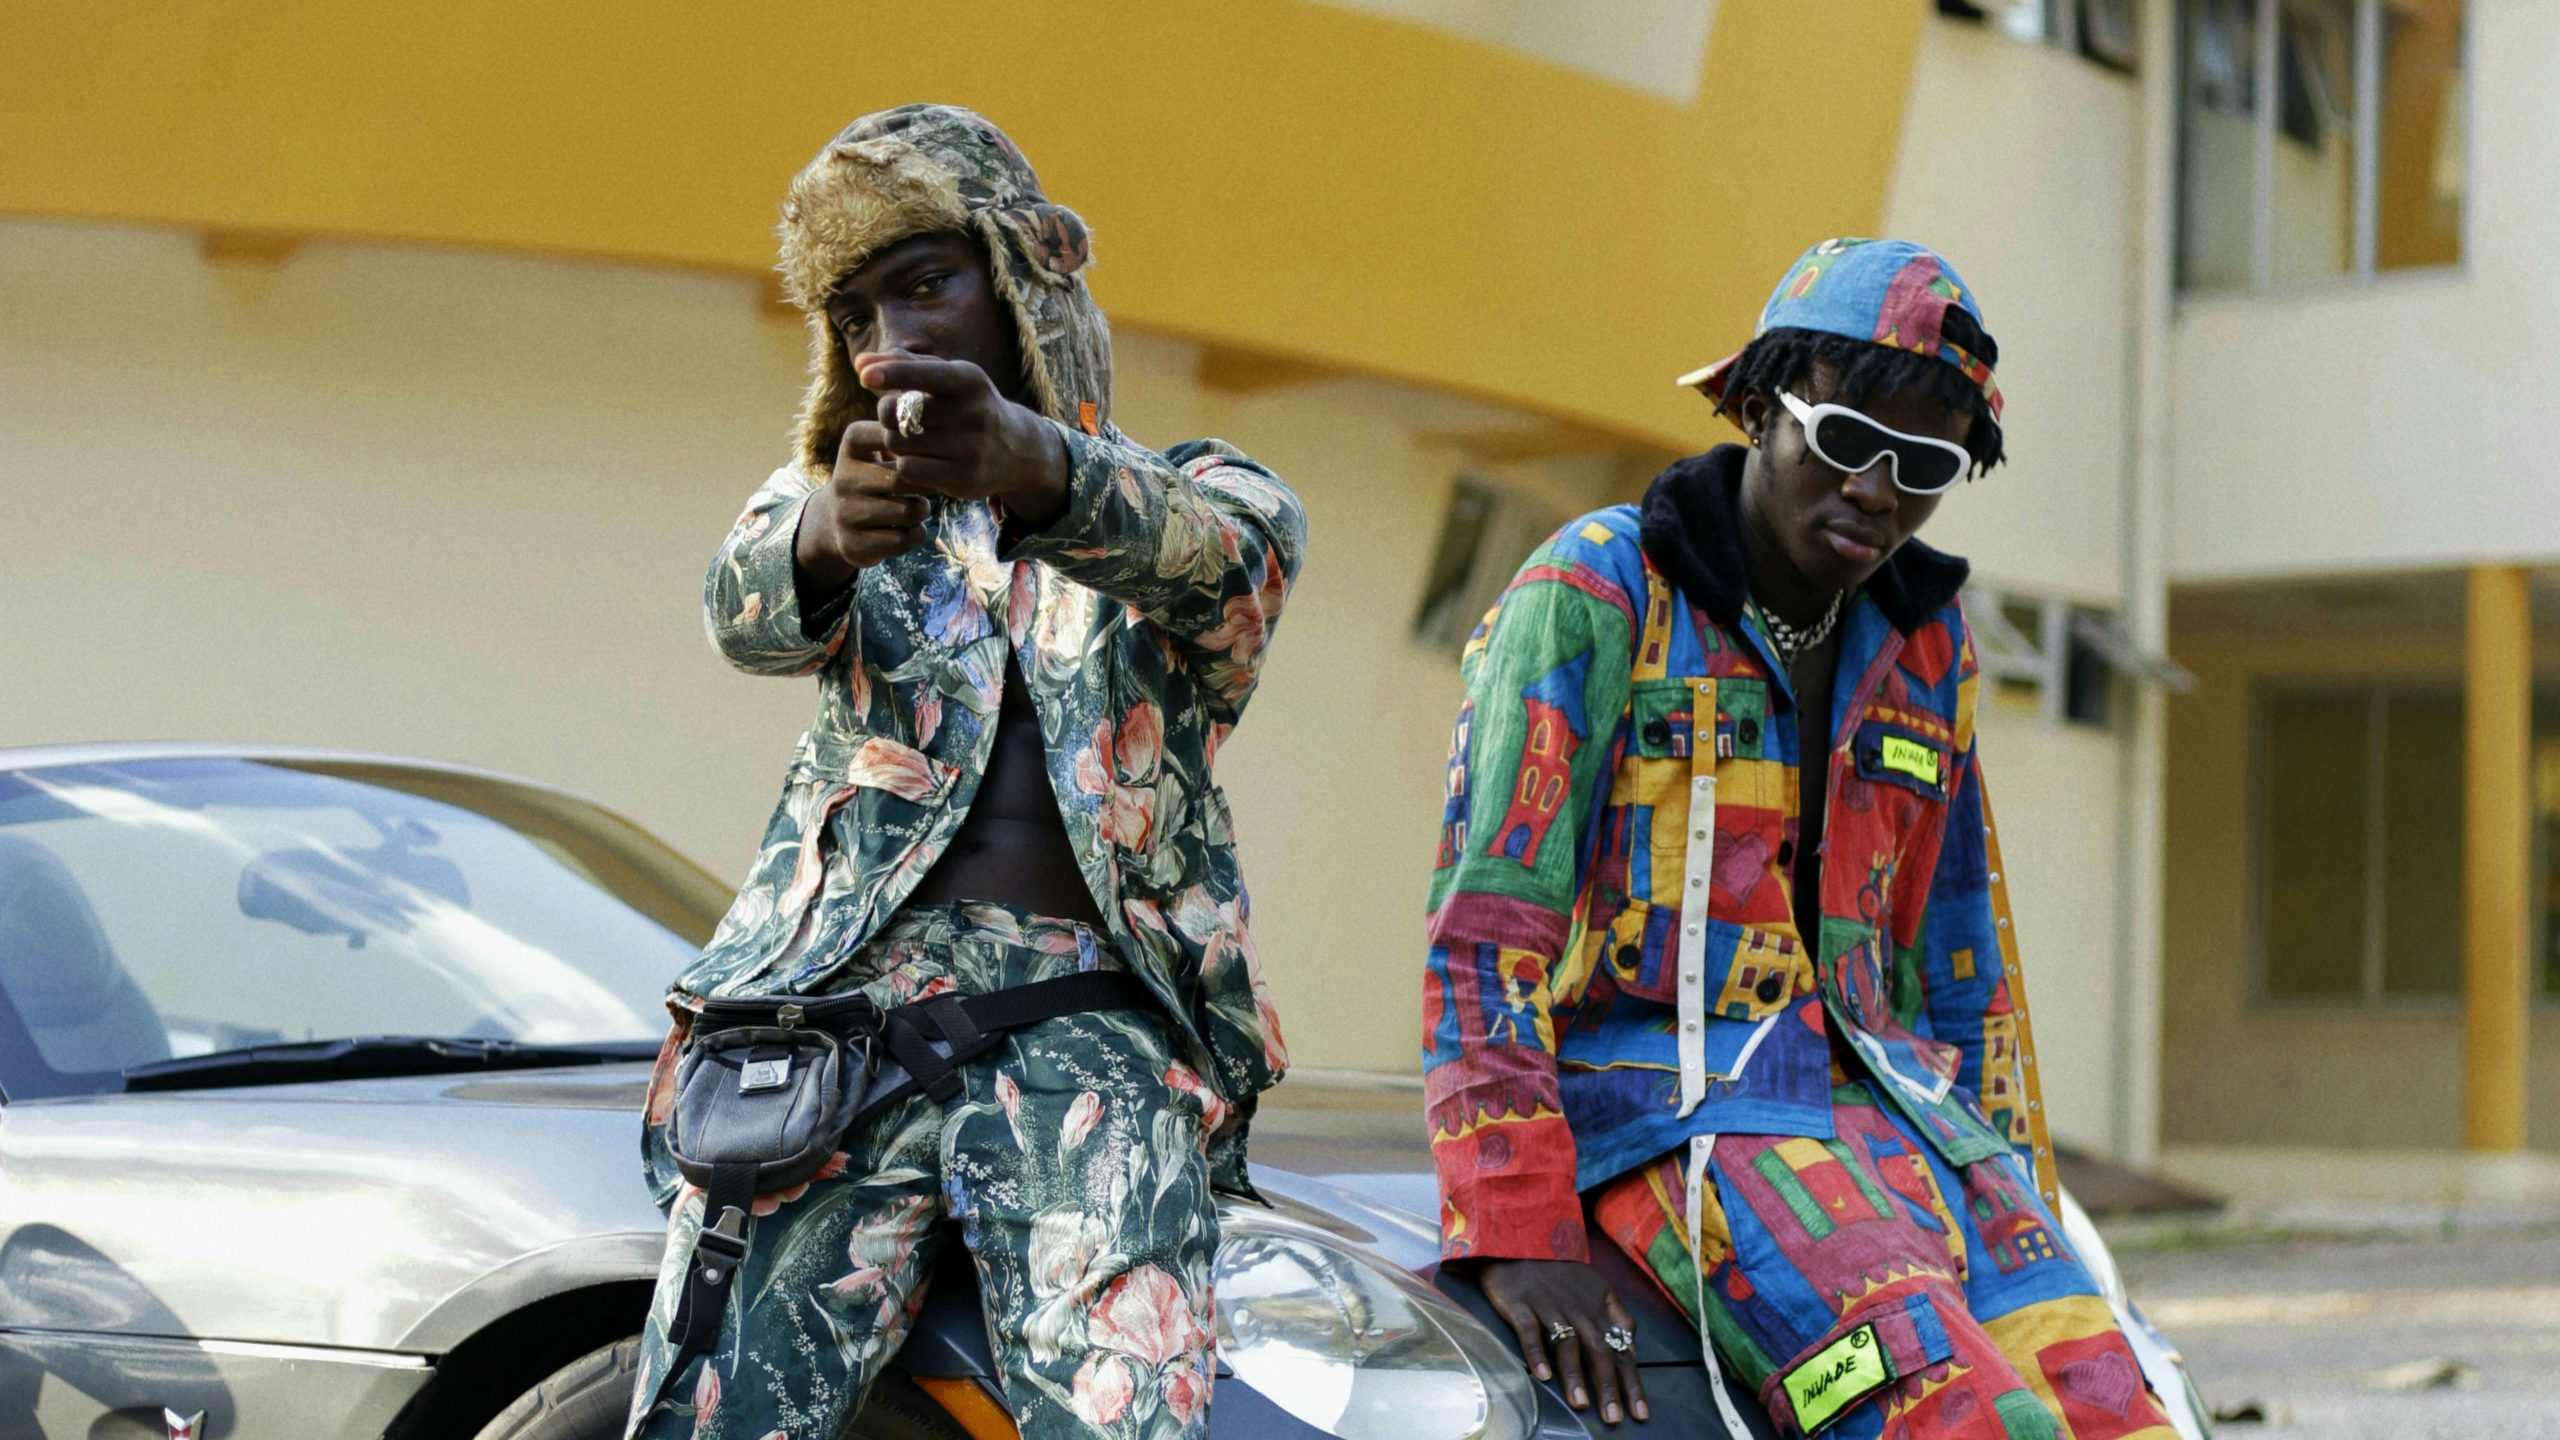 Ghanaian Collective Invade The World and The Kumericans Debut Collaborative Project BUST